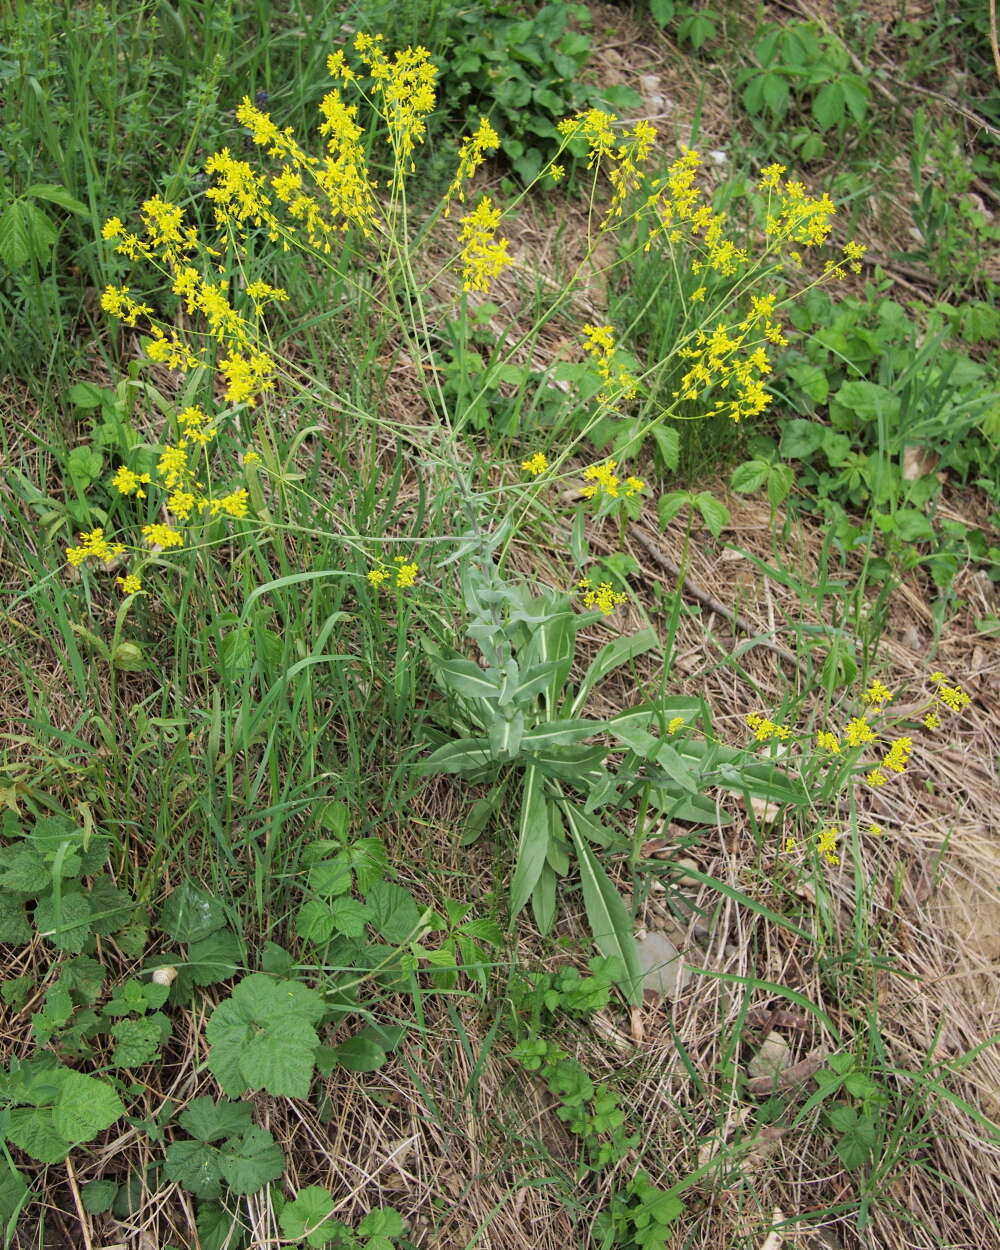 Image of woad